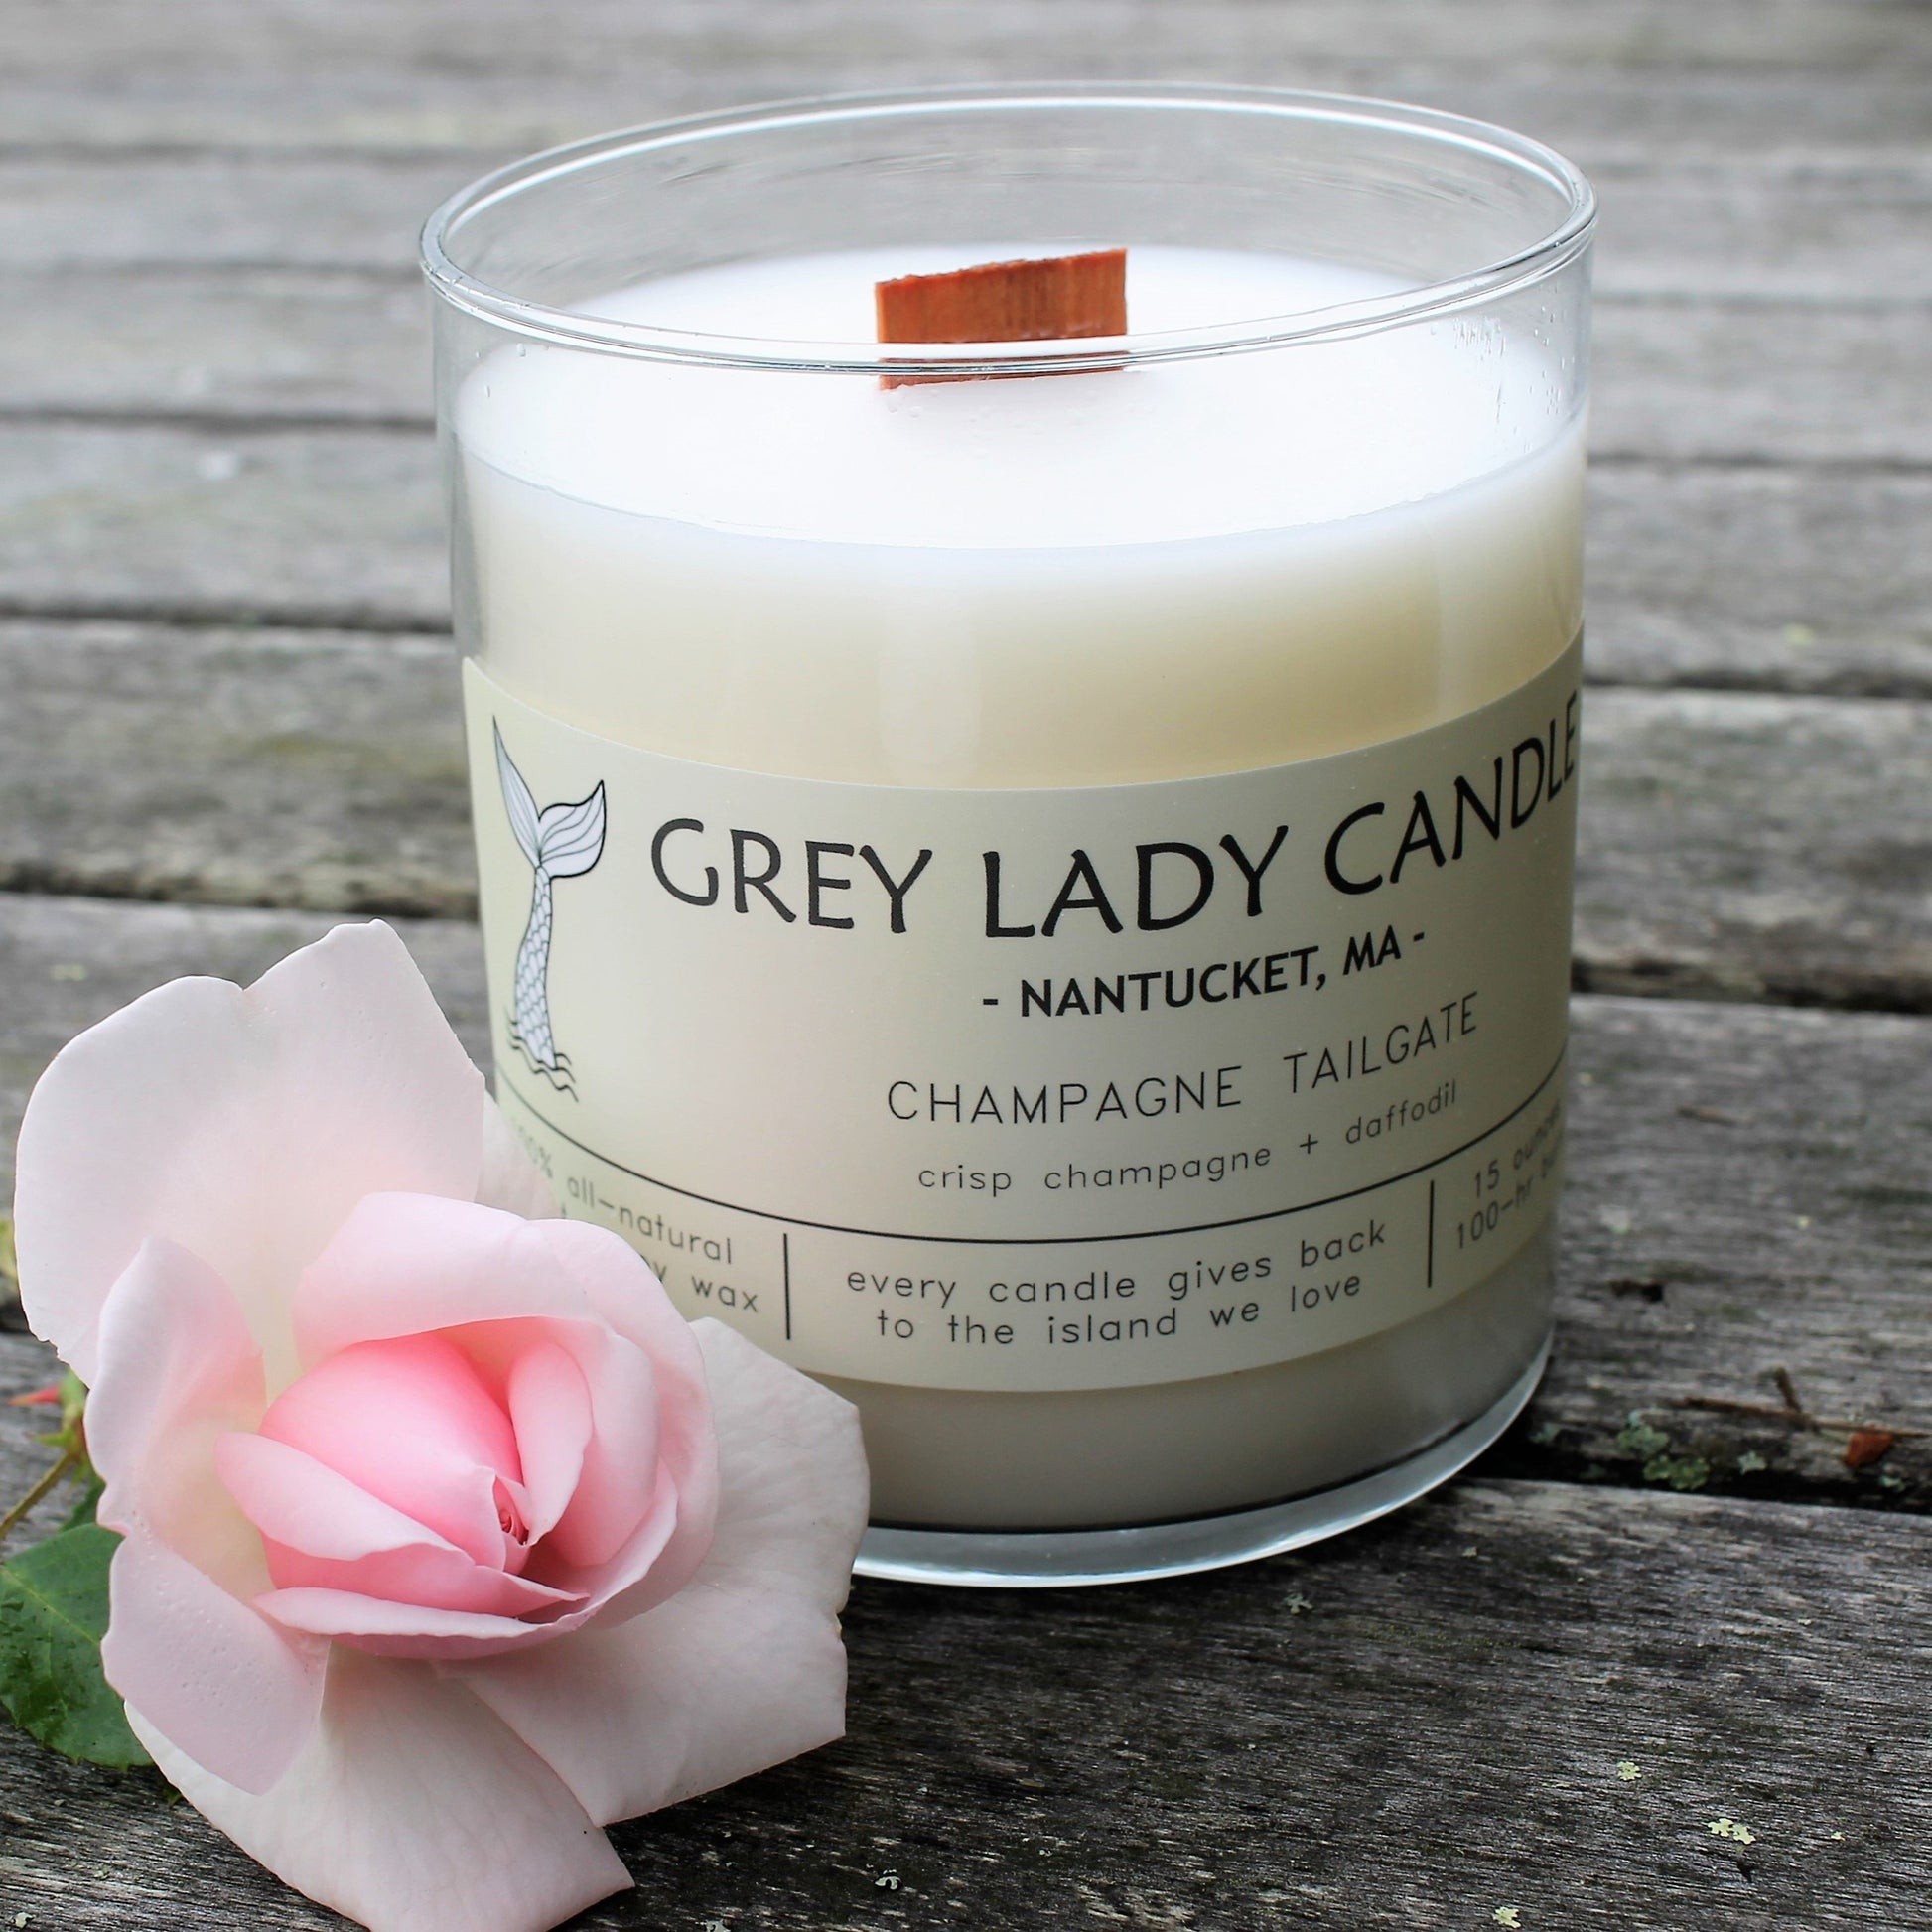 Grey Lady Candle - Nantucket, MA - Champagne Tailgate